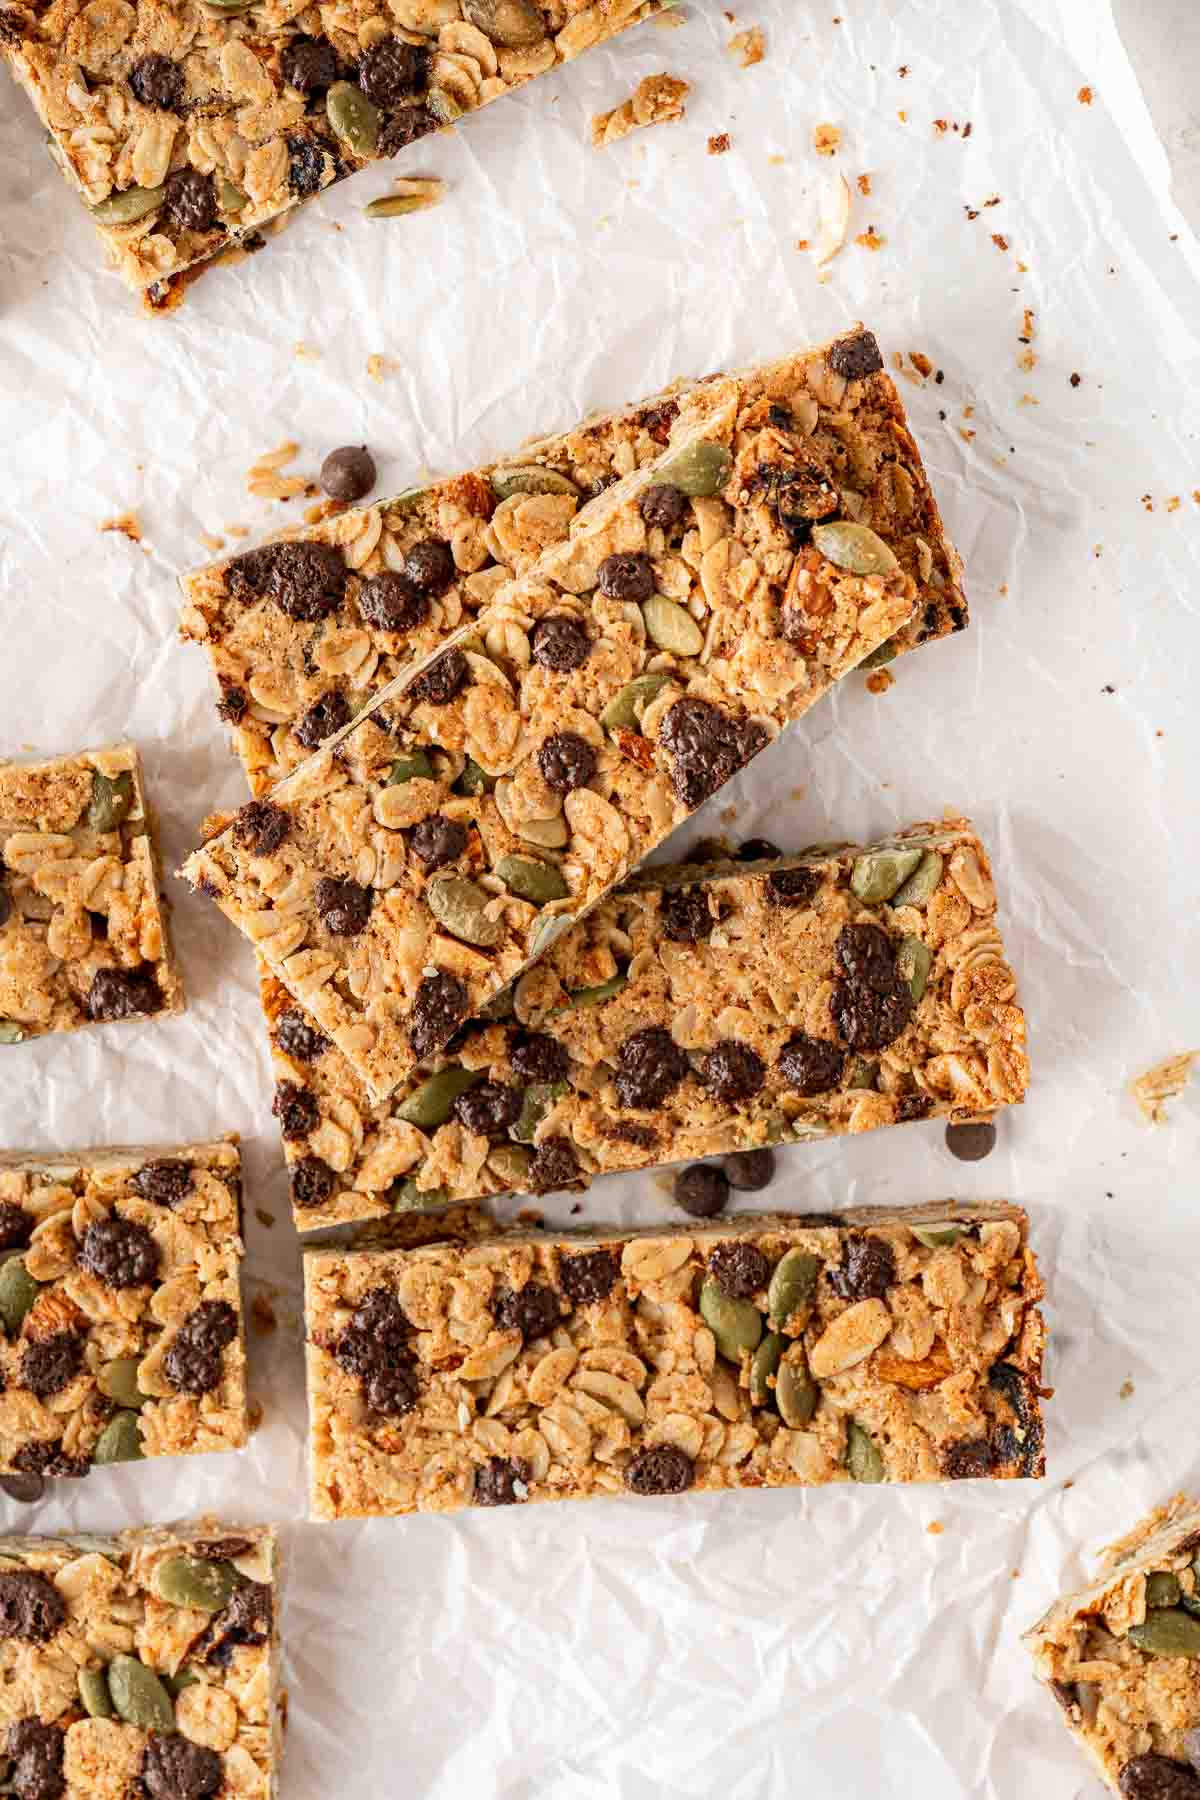 Granola bars laid out on baking paper.